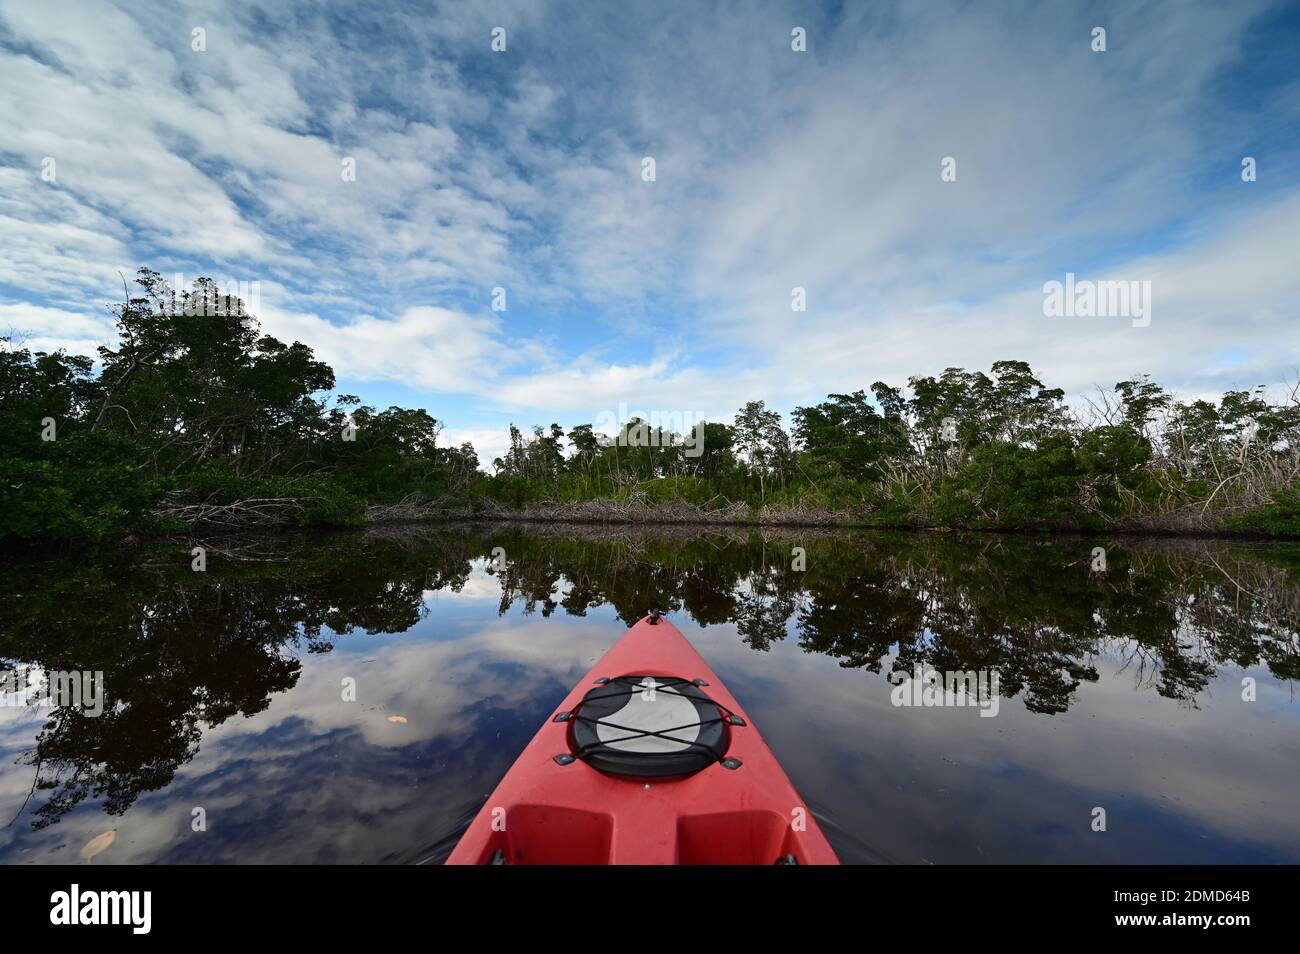 Red kayak in Coot Bay Pond in Everglades National Park, Florida under winter cloudscape reflected in tranquil water. Stock Photo